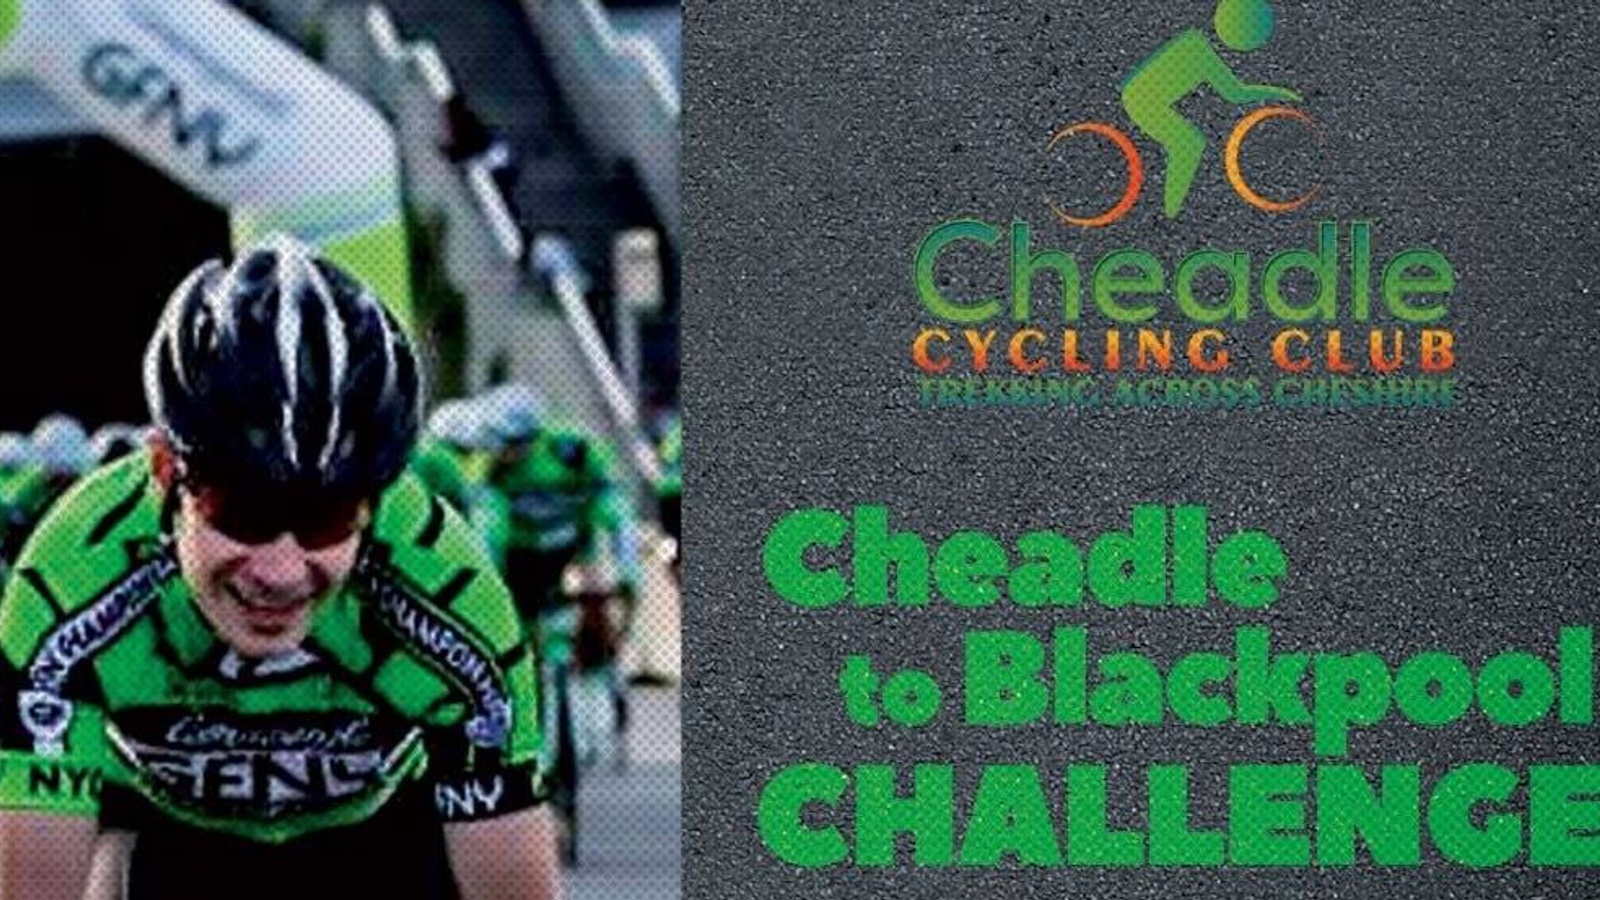 *POSTPONED DUE TO COVID-19* Cheadle to Blackpool Challenge